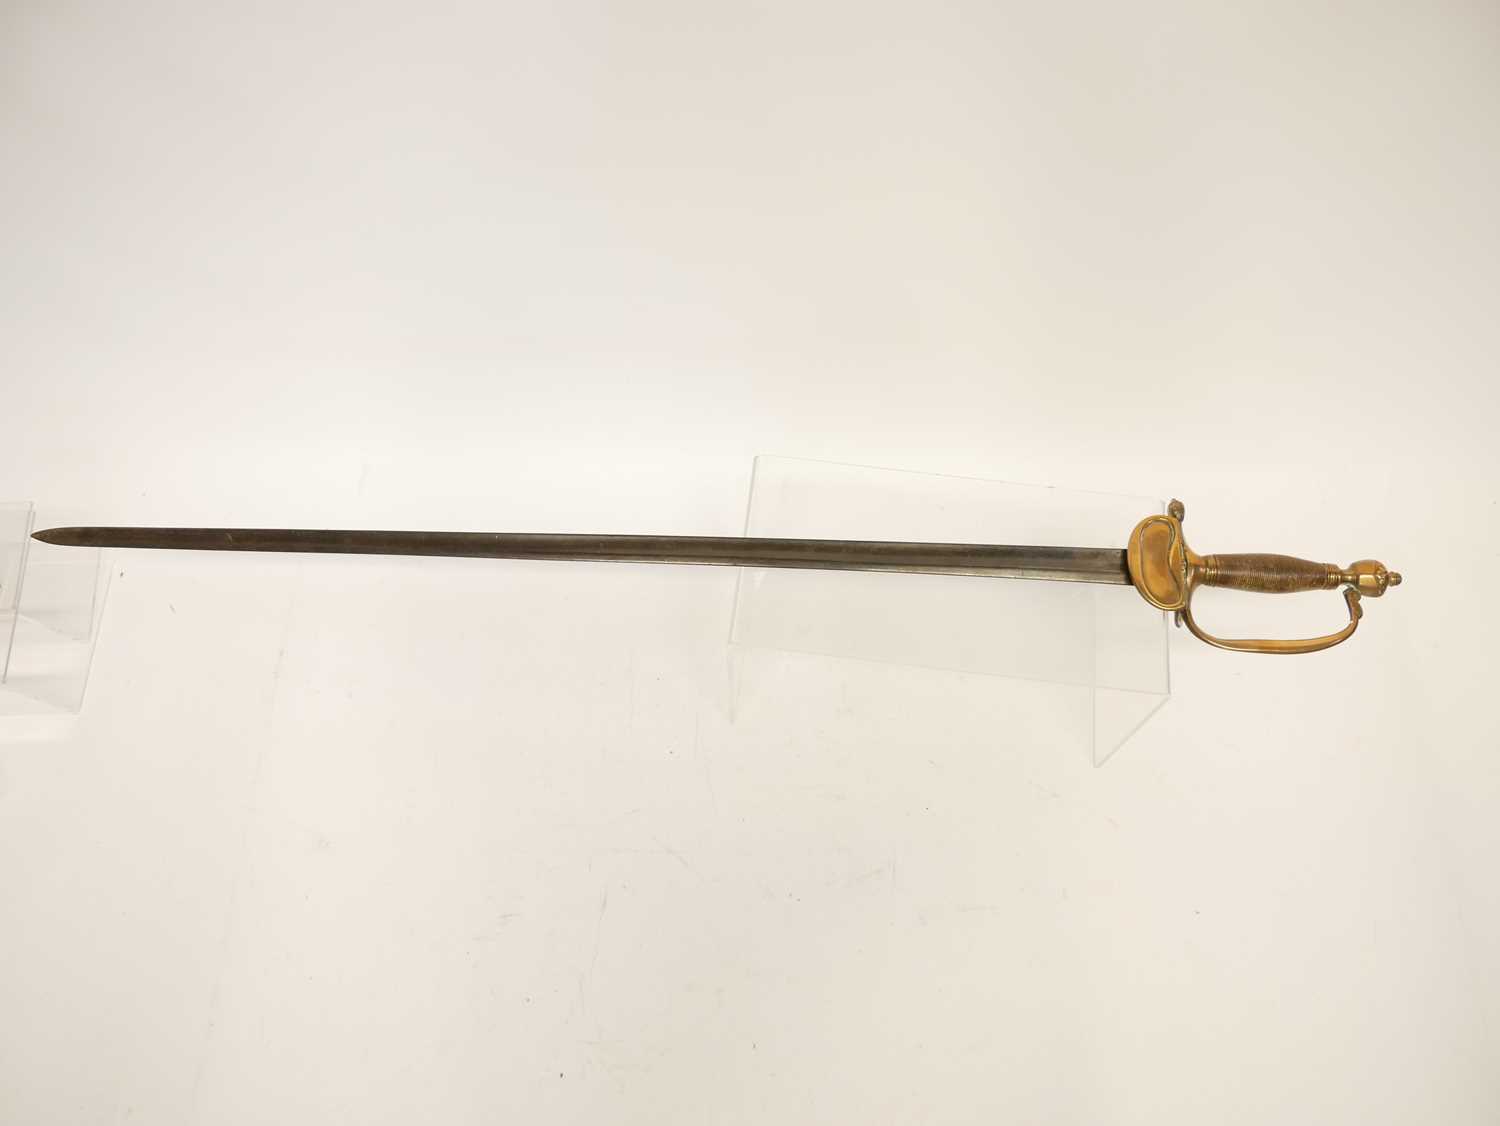 1796 pattern infantry officers sword, 32inch fullered blade, wire bound grip and folding guard. - Image 5 of 5